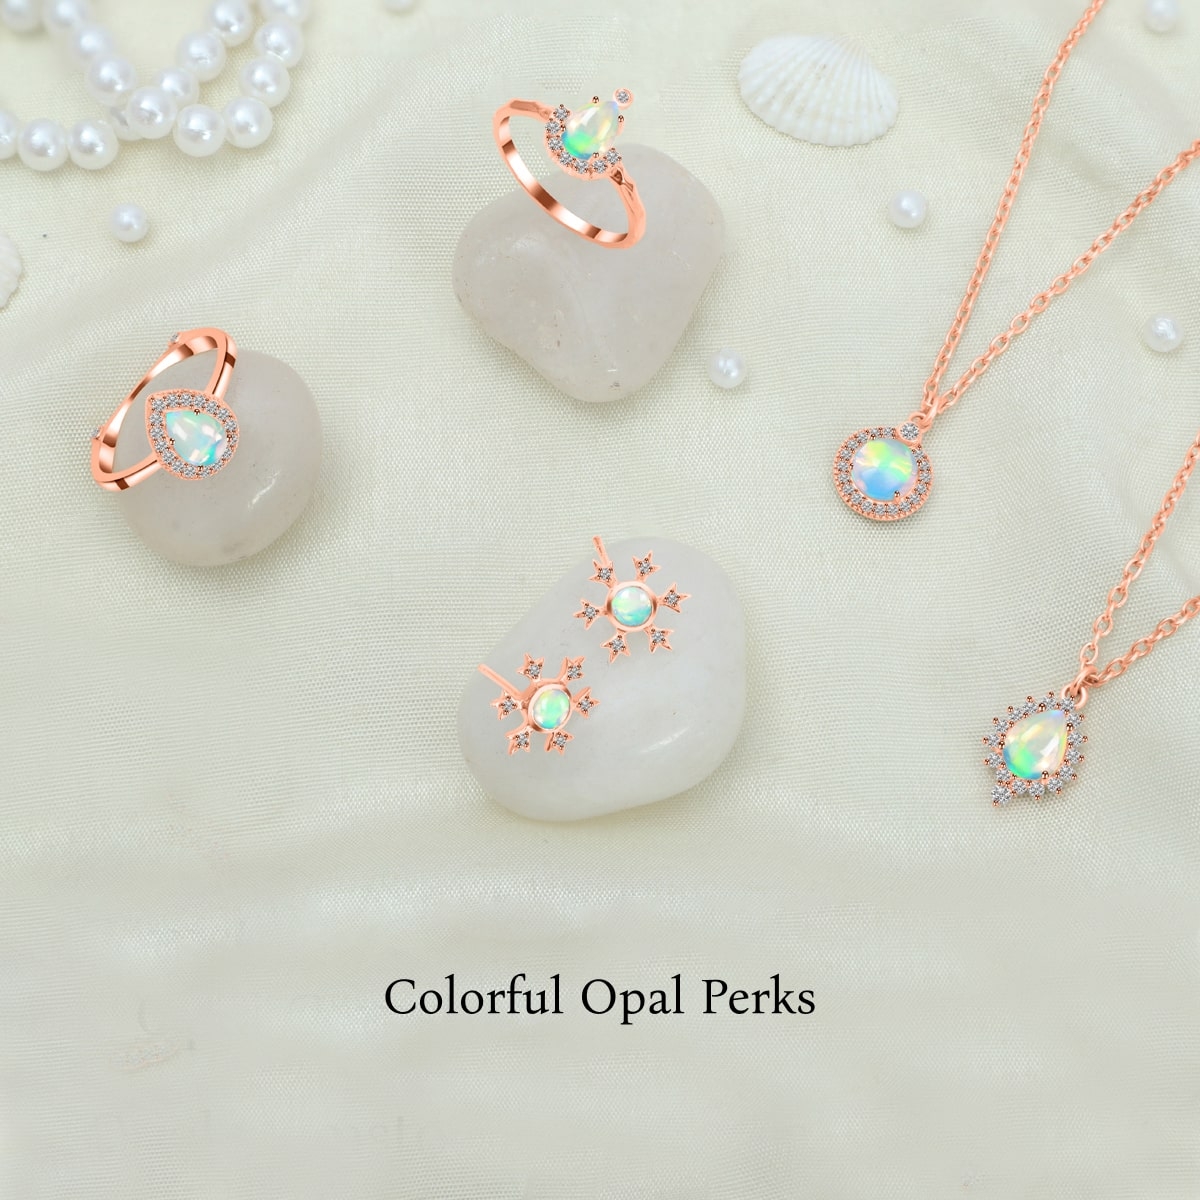 Benefits of colour specified Opal